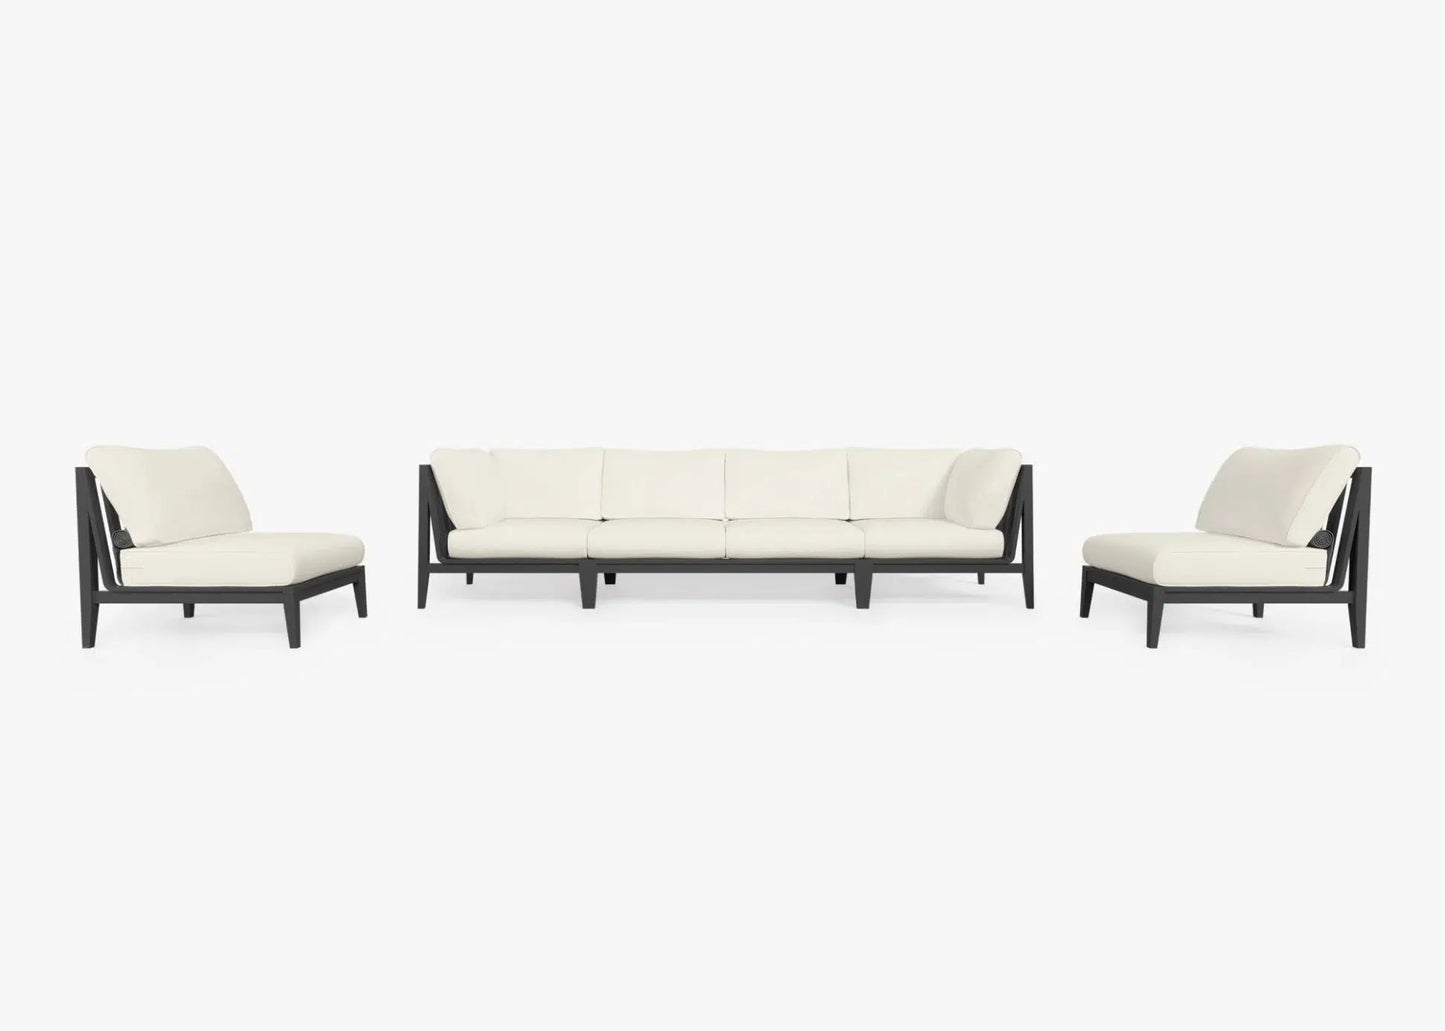 Live Outer 127" Charcoal Aluminum Outdoor Sofa With Armless Chairs and Palisades Cream Cushion (6-Seat)